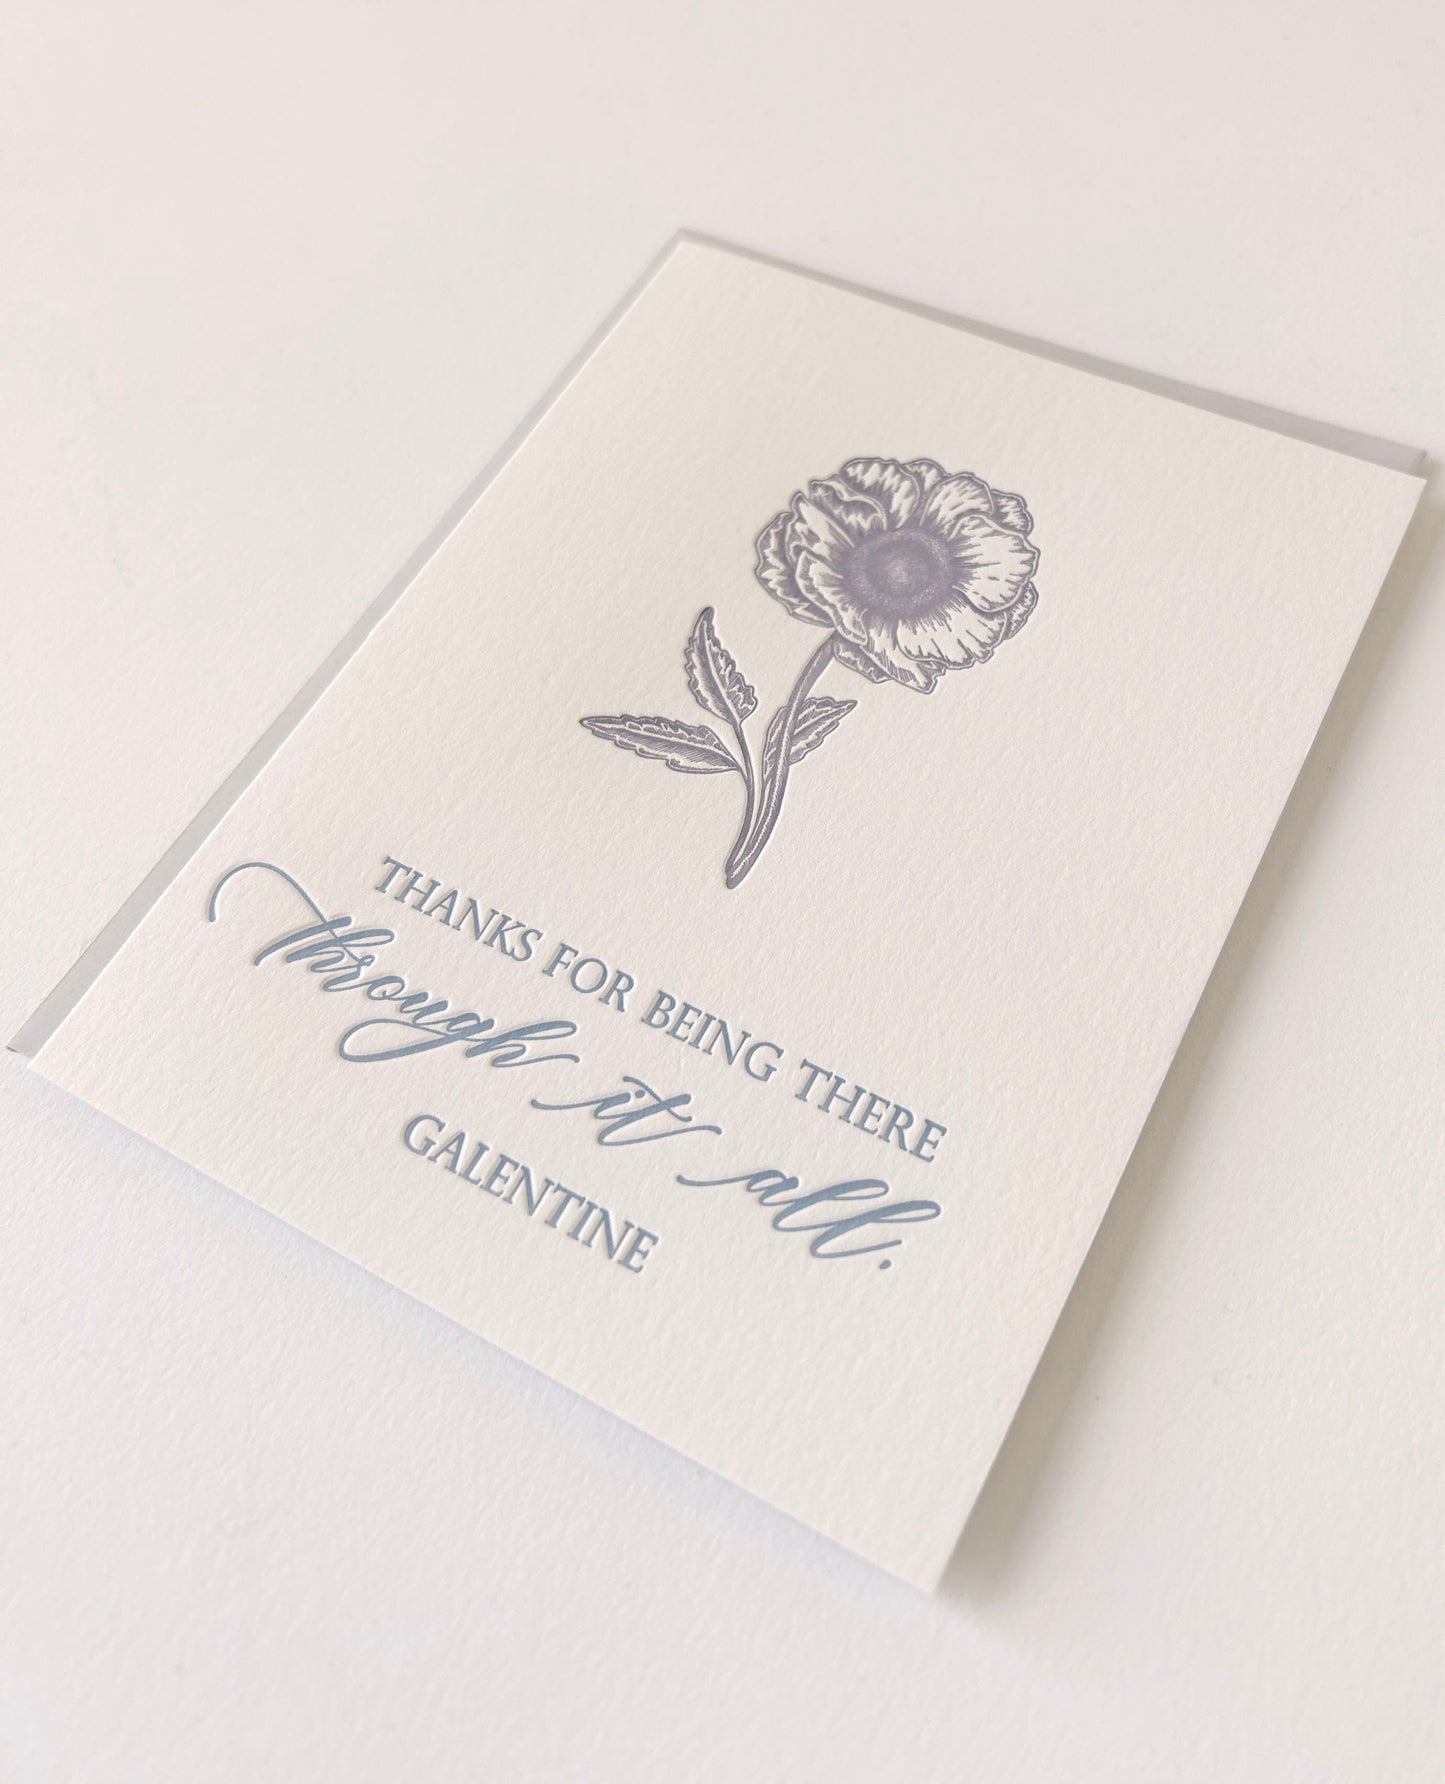 Letterpress love card with a flower that says " Thanks For Being There Through It All, Galentine" by Rust Belt Love